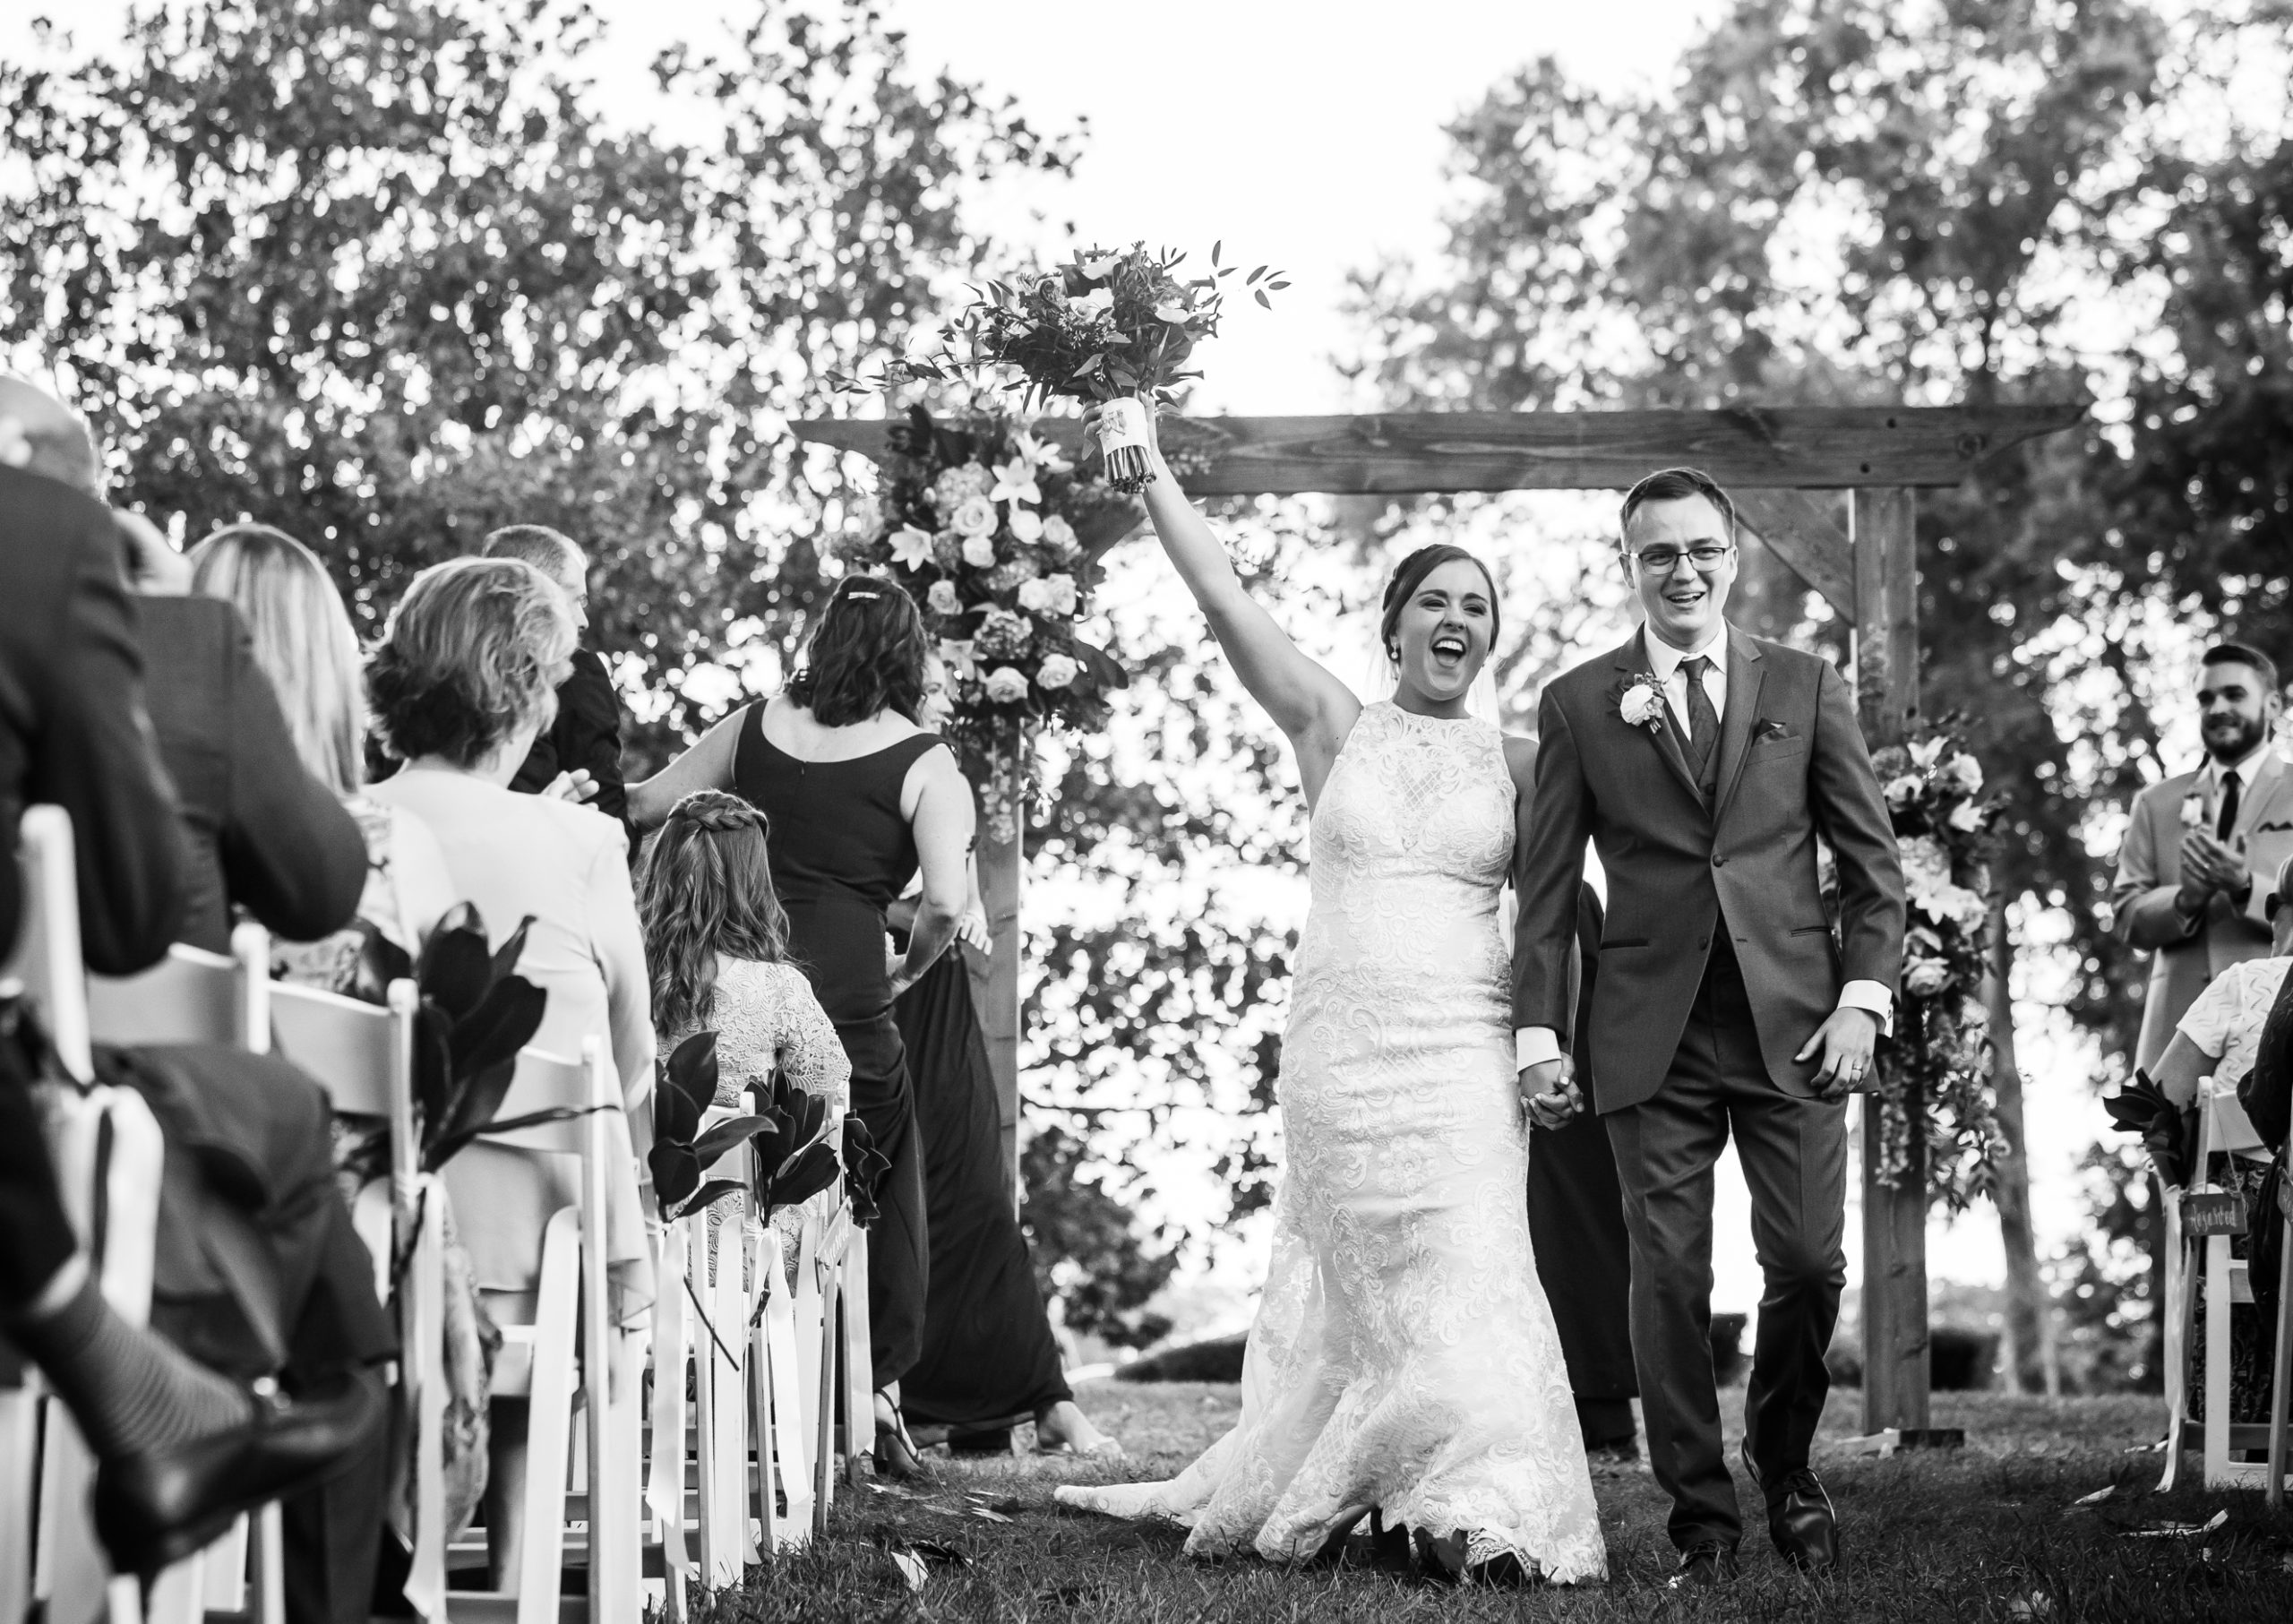 Bride with arm in the air celebrating after announced husband and wife